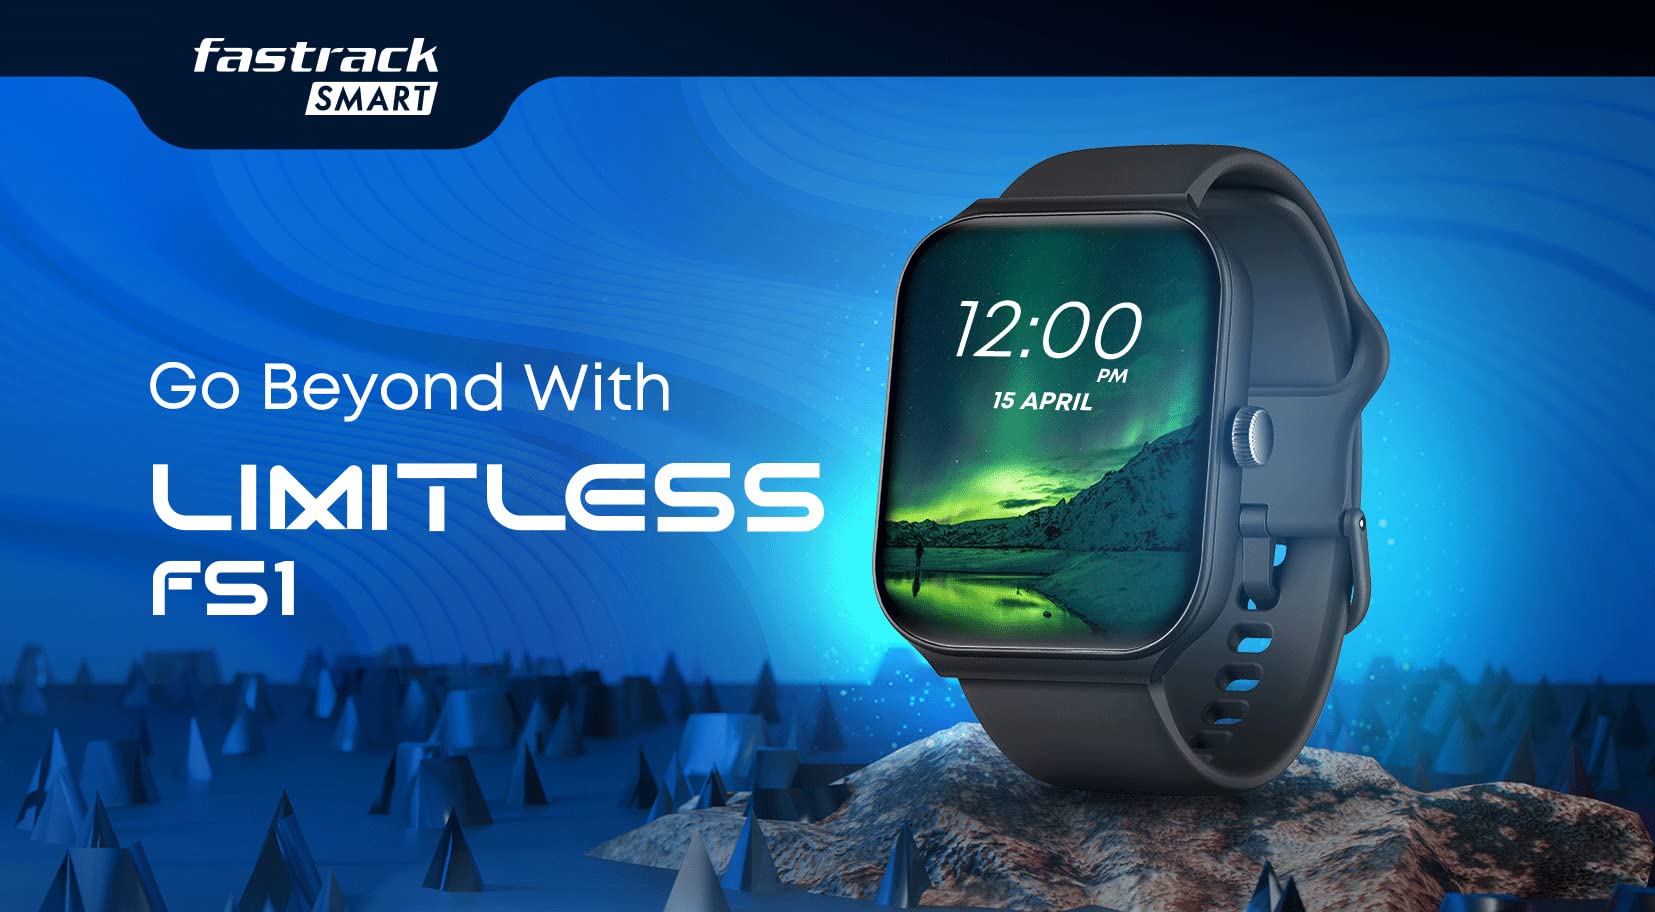 Fastrack Limitless FS1 with 1.95″ display, ATS Chipset, Bluetooth calling launched at an introductory price of Rs